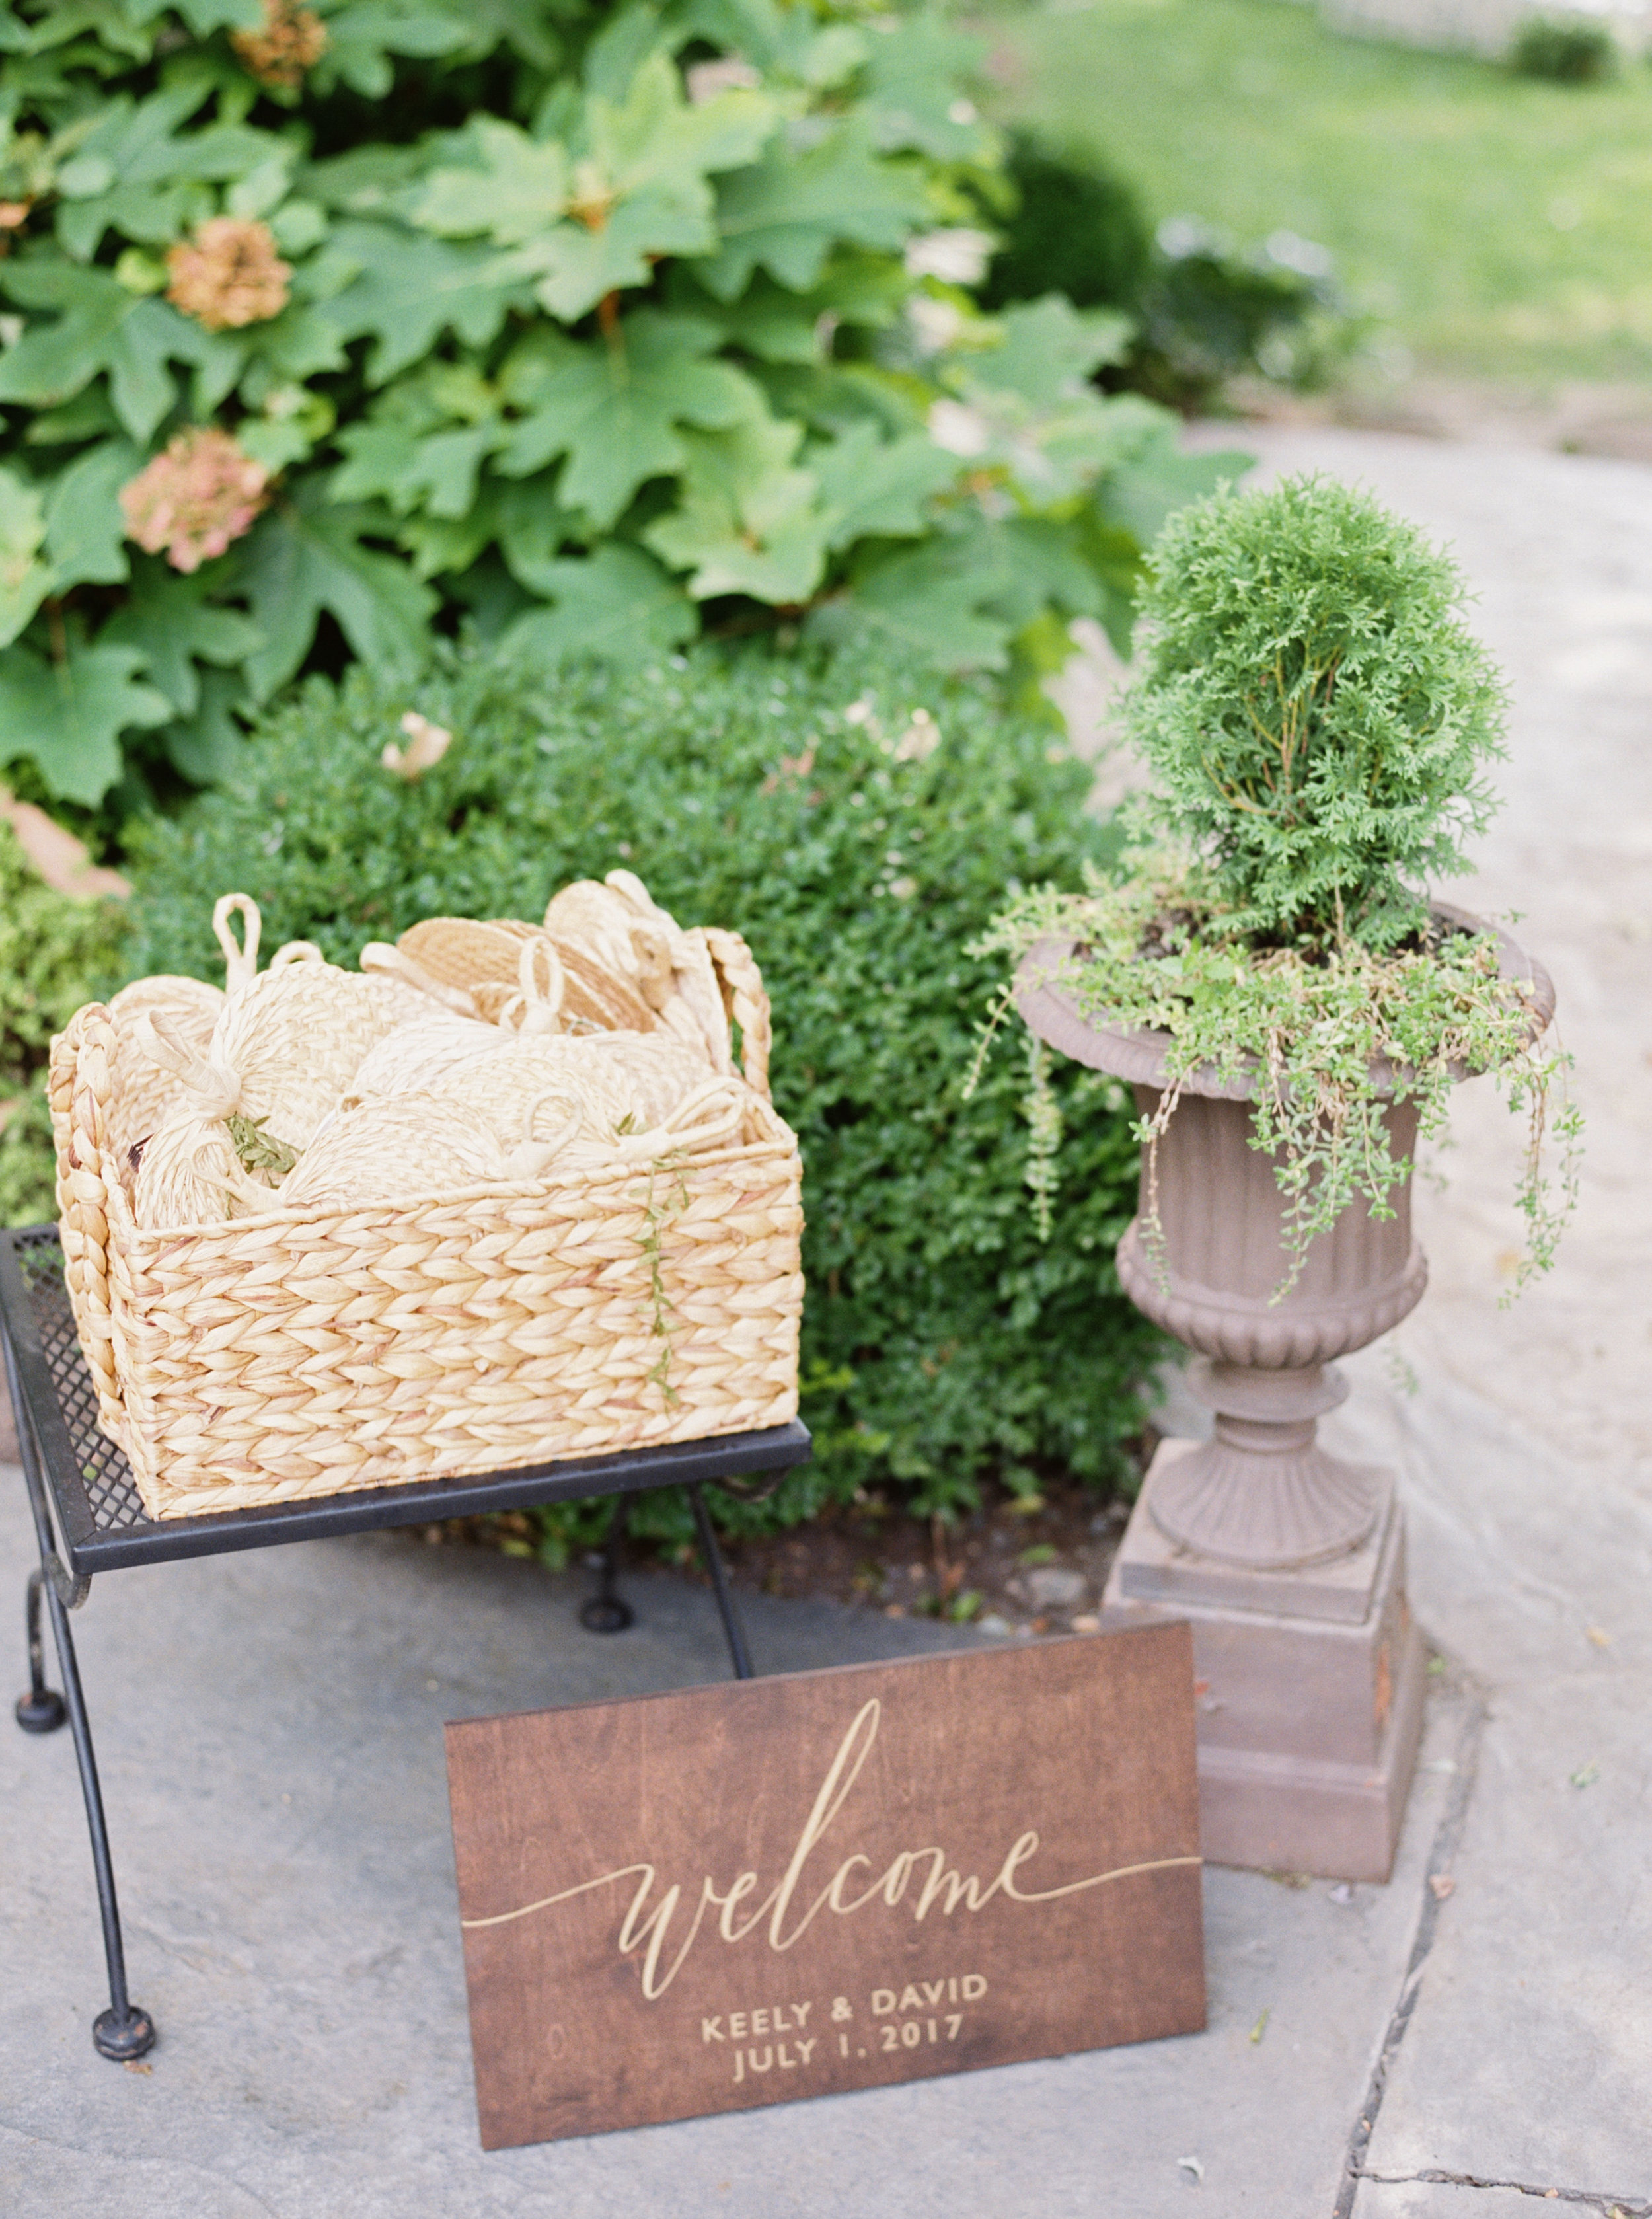 Photosynthesis Floral Design - Shannon Moffit Photography